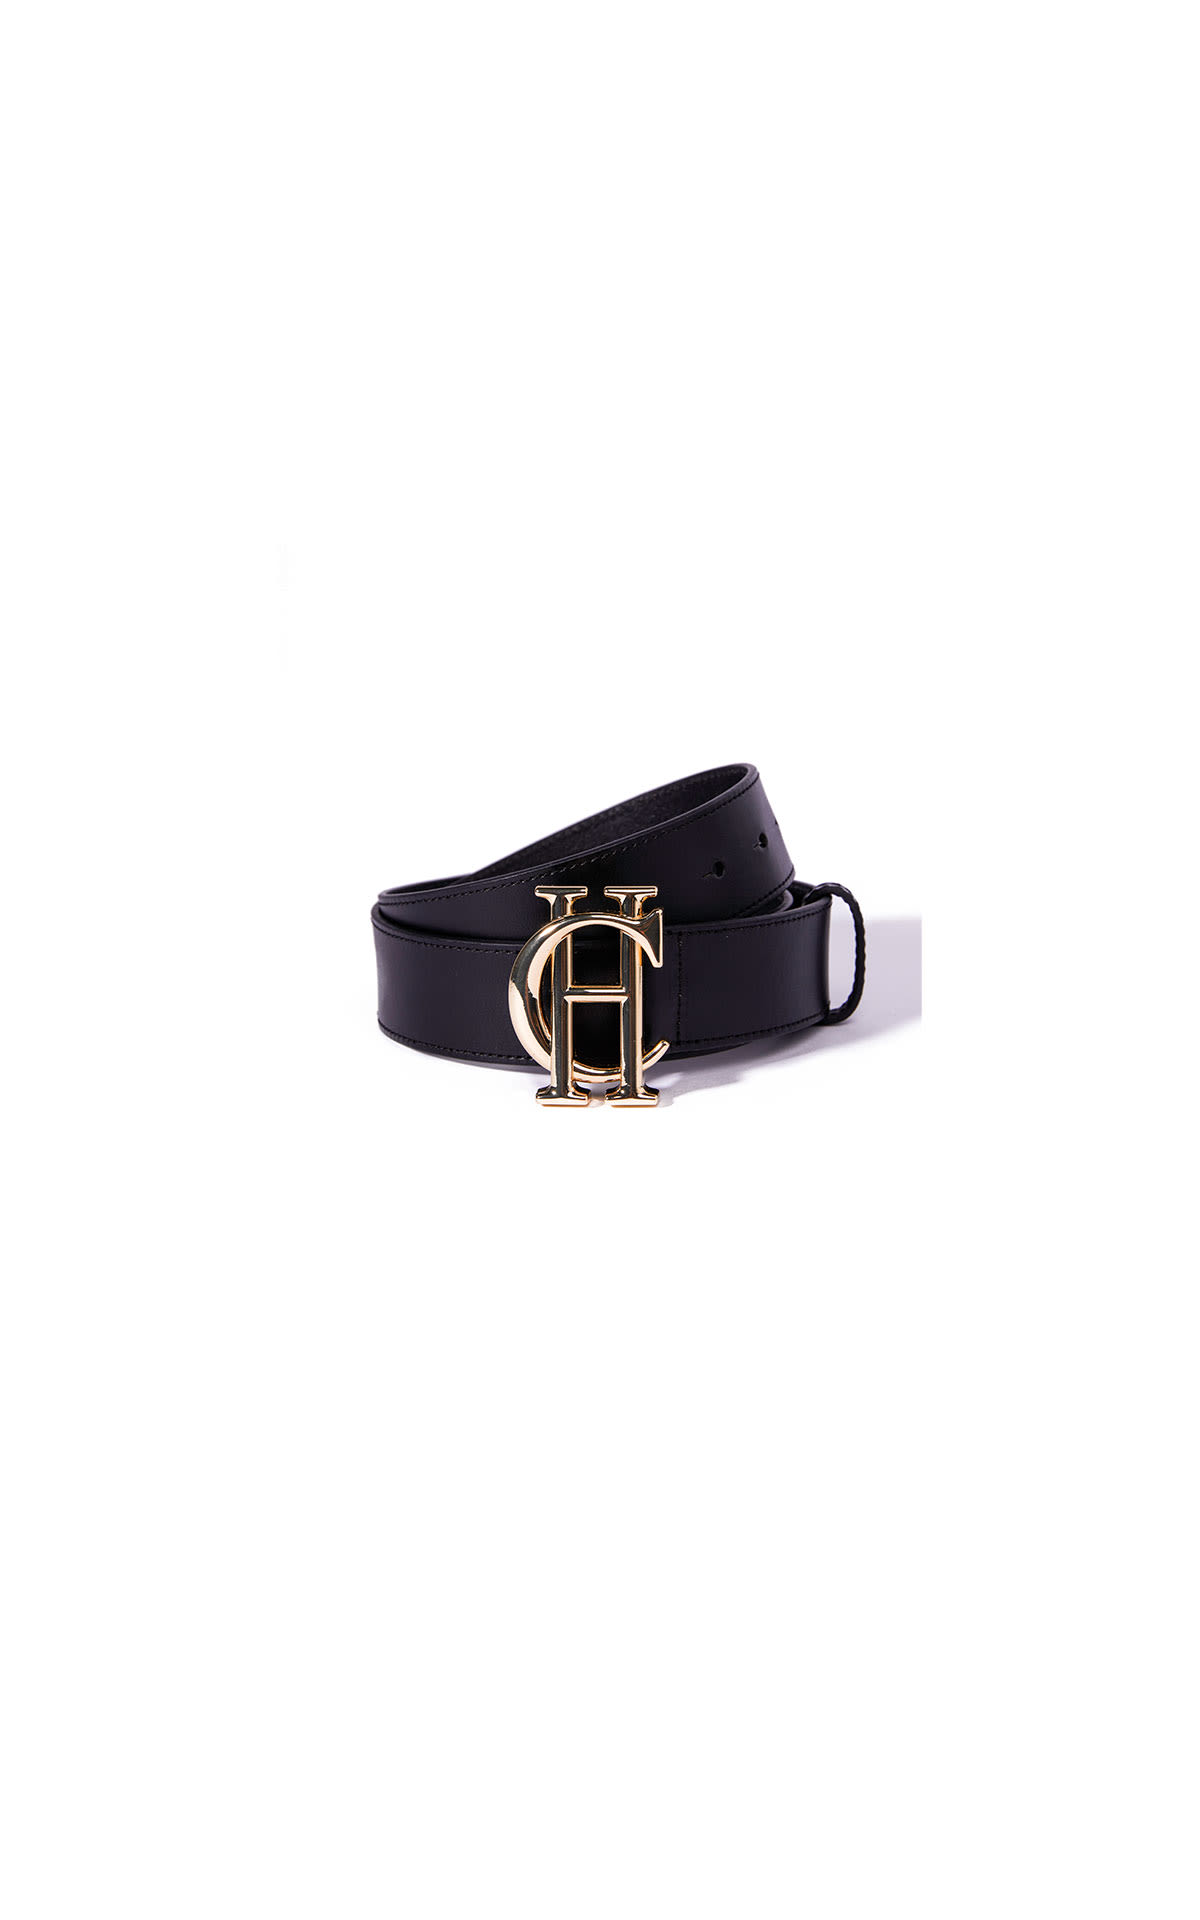 Holland Cooper HC classic belt from Bicester Village